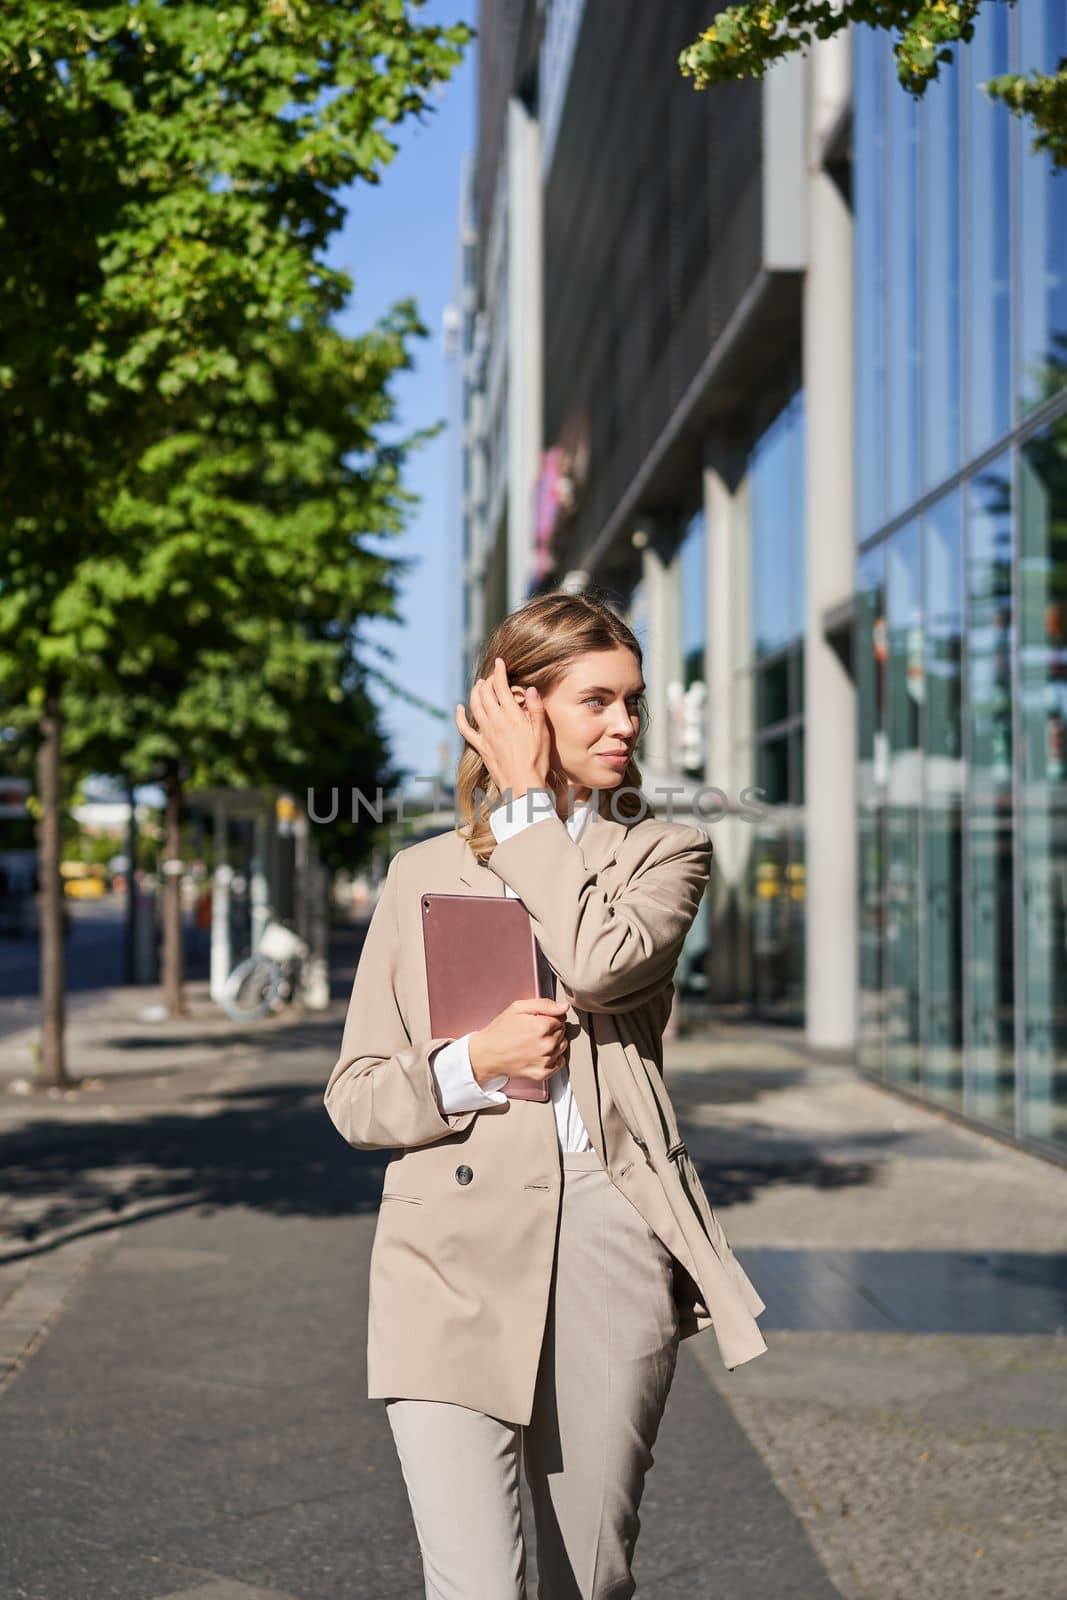 Vertical shot of successful business woman, team leader in suit, holding digital tablet, walking on street. Corporate lady goes to work.